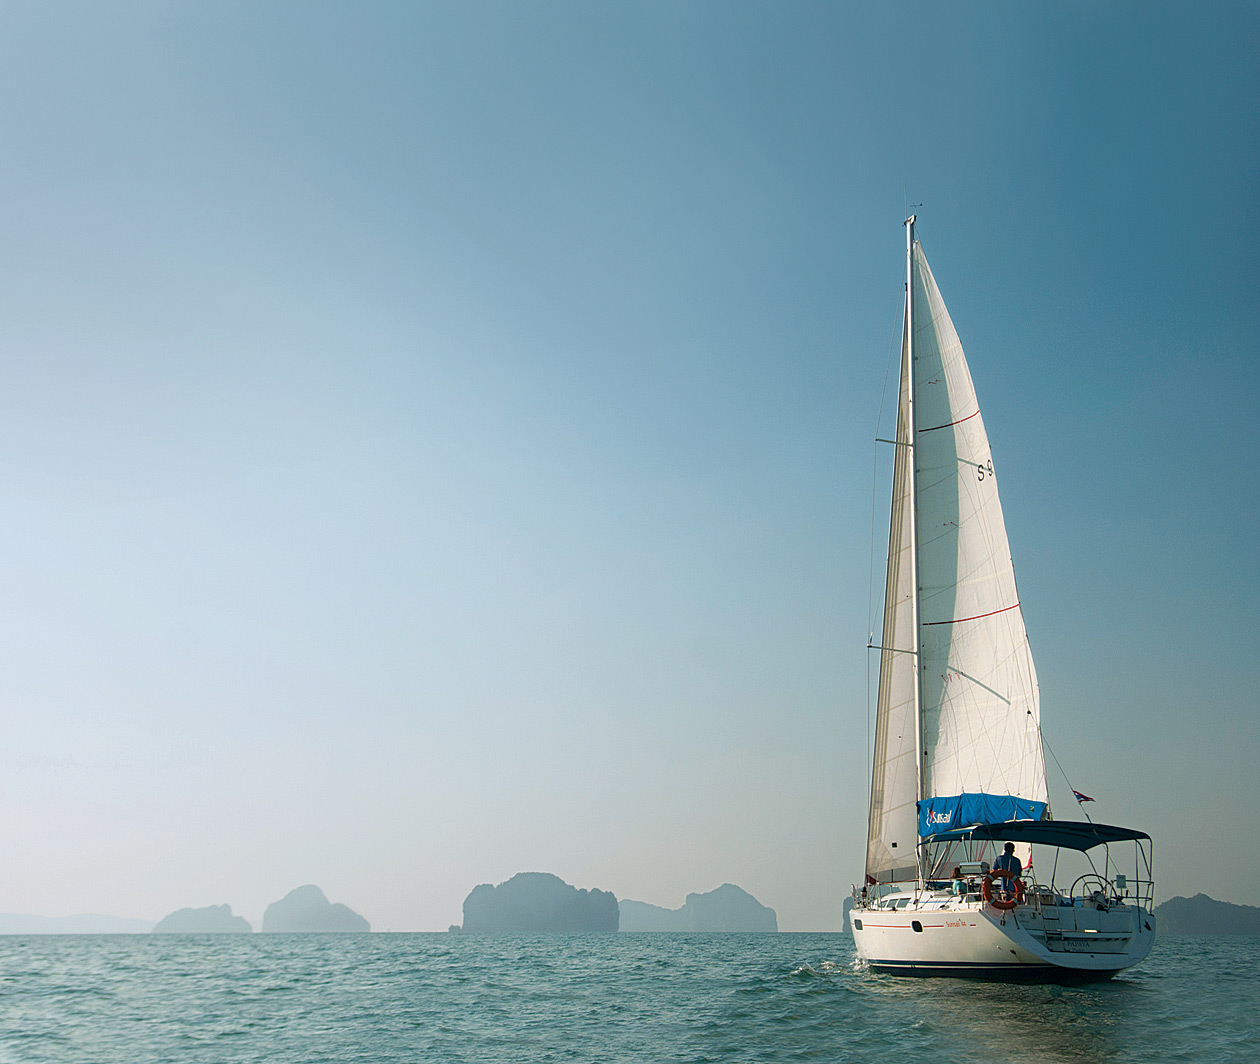 The sloop Papaya sailing into the karst-studded seascape of Phang Nga Bay, most of which is protected as a national marine park.